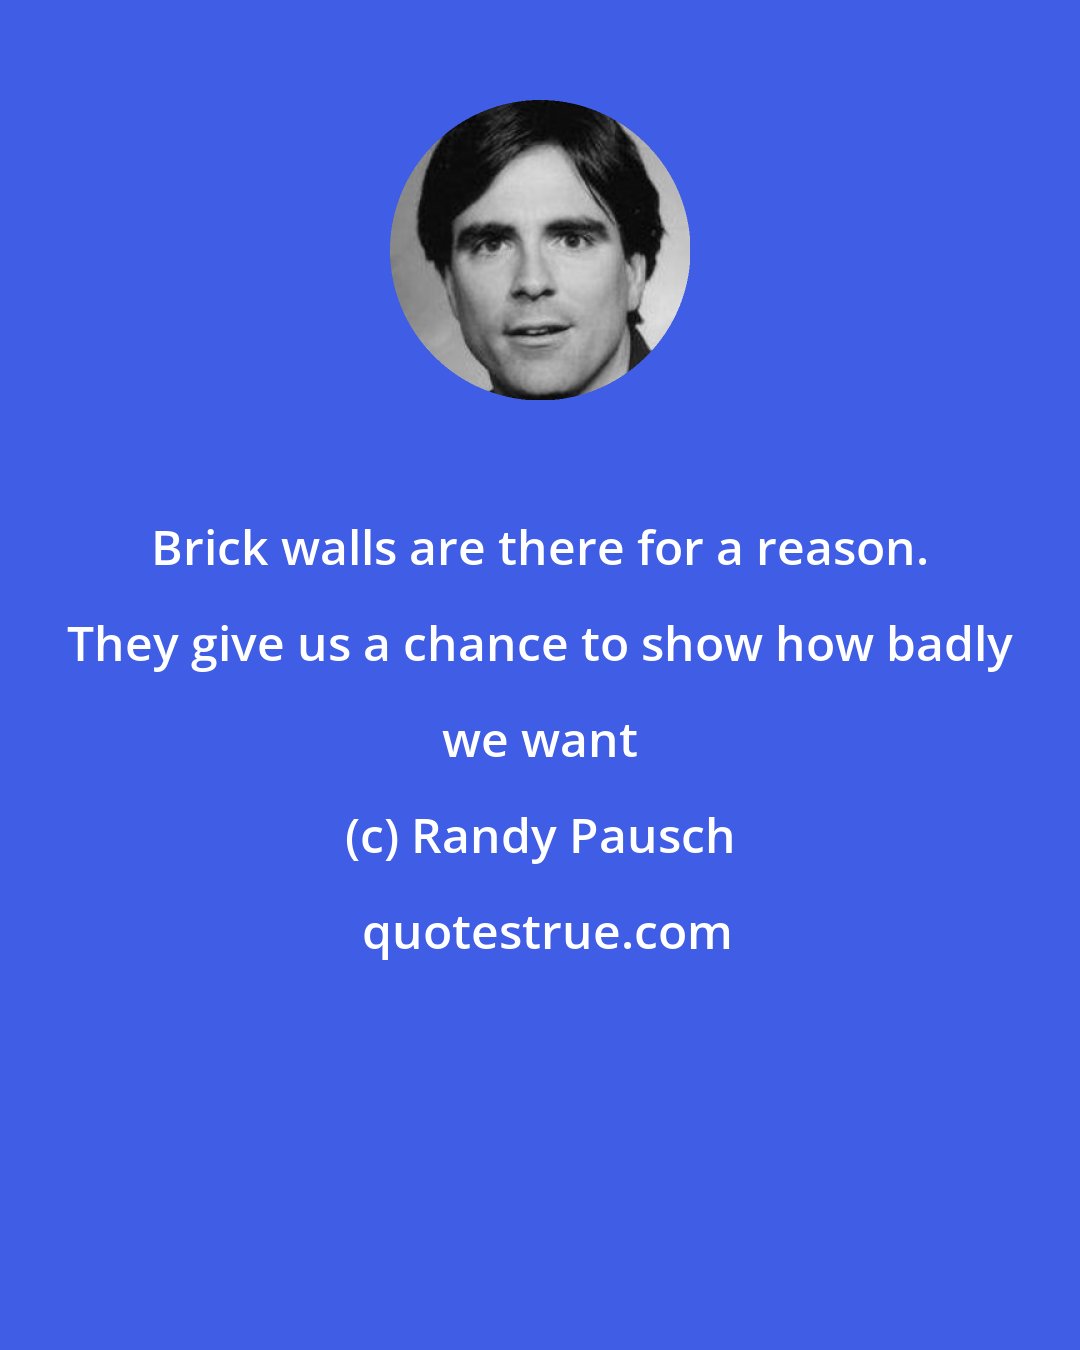 Randy Pausch: Brick walls are there for a reason. They give us a chance to show how badly we want